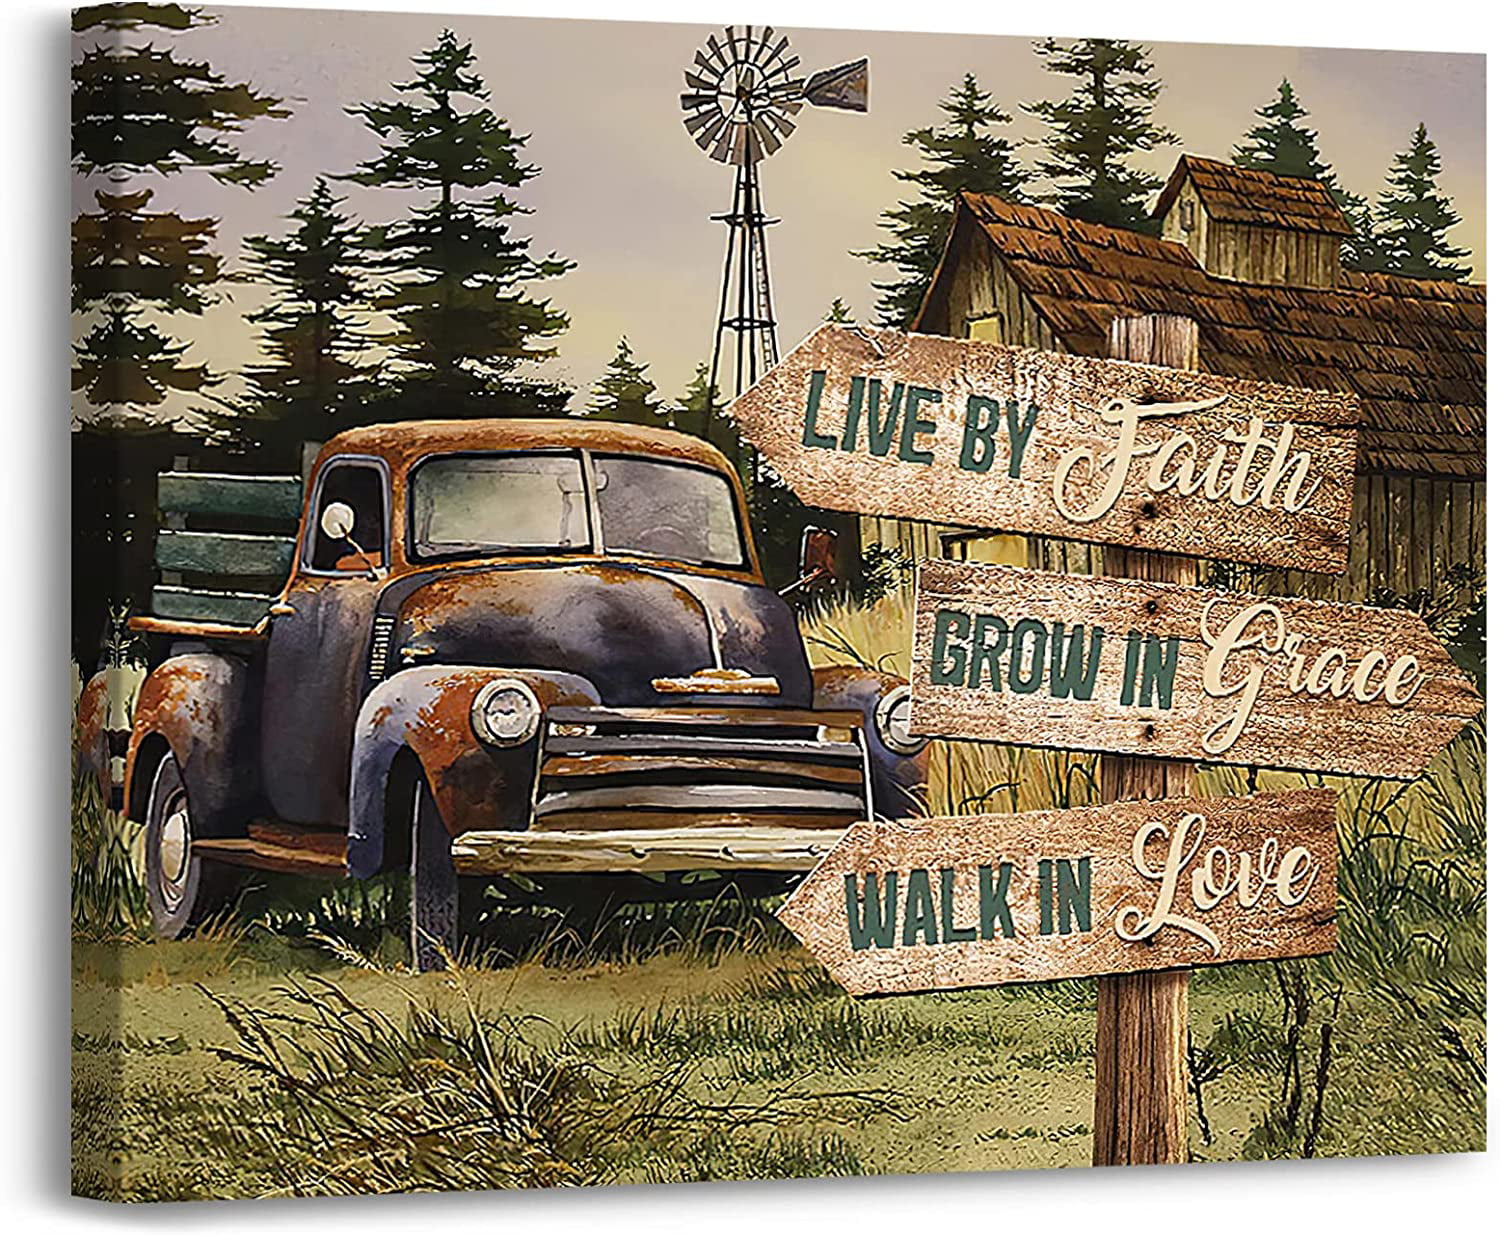 WISH TREE Rustic Wall Decor Old Barn Painted Old Car Canvas Wall Art  Country Farmhouse Wesome Farmlife Artwork For Bedroom Bathroom